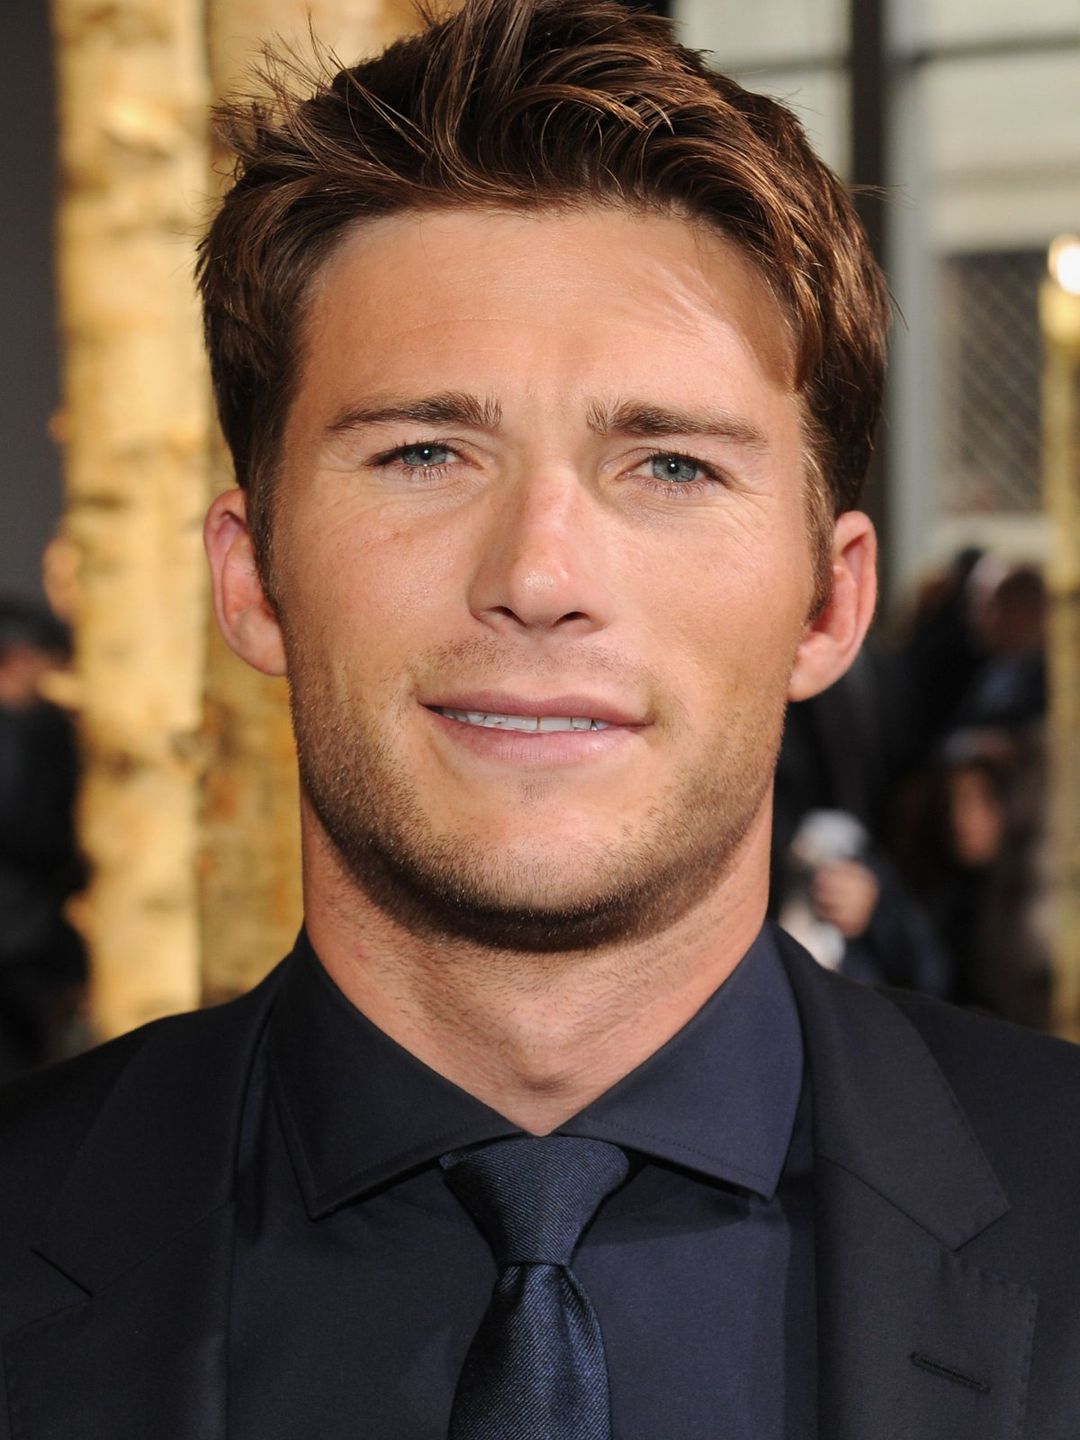 Scott Eastwood does he have kids